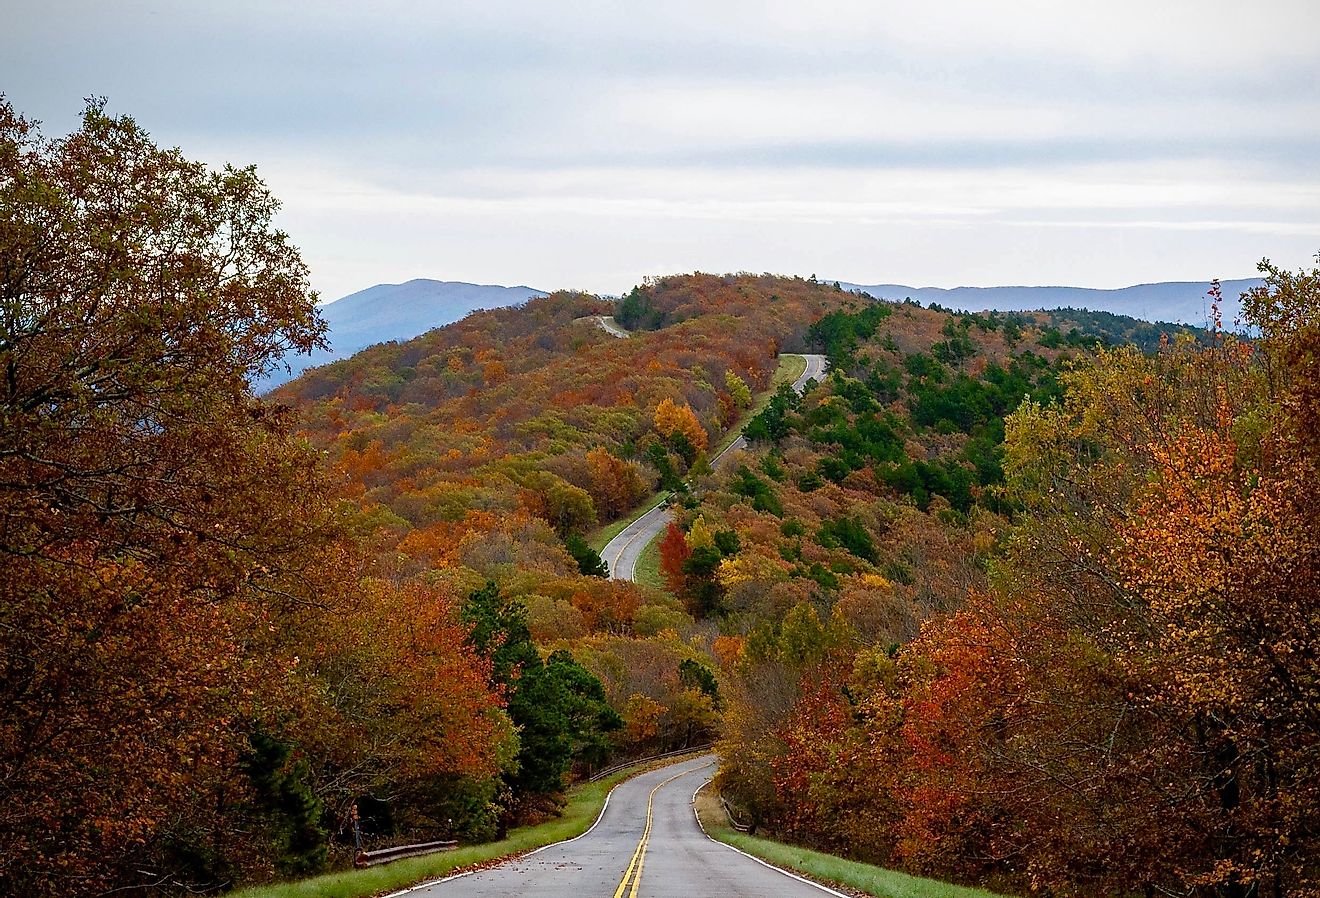 Overlooking a hill along the Talimena National Scenic Byway with stunning fall colors.